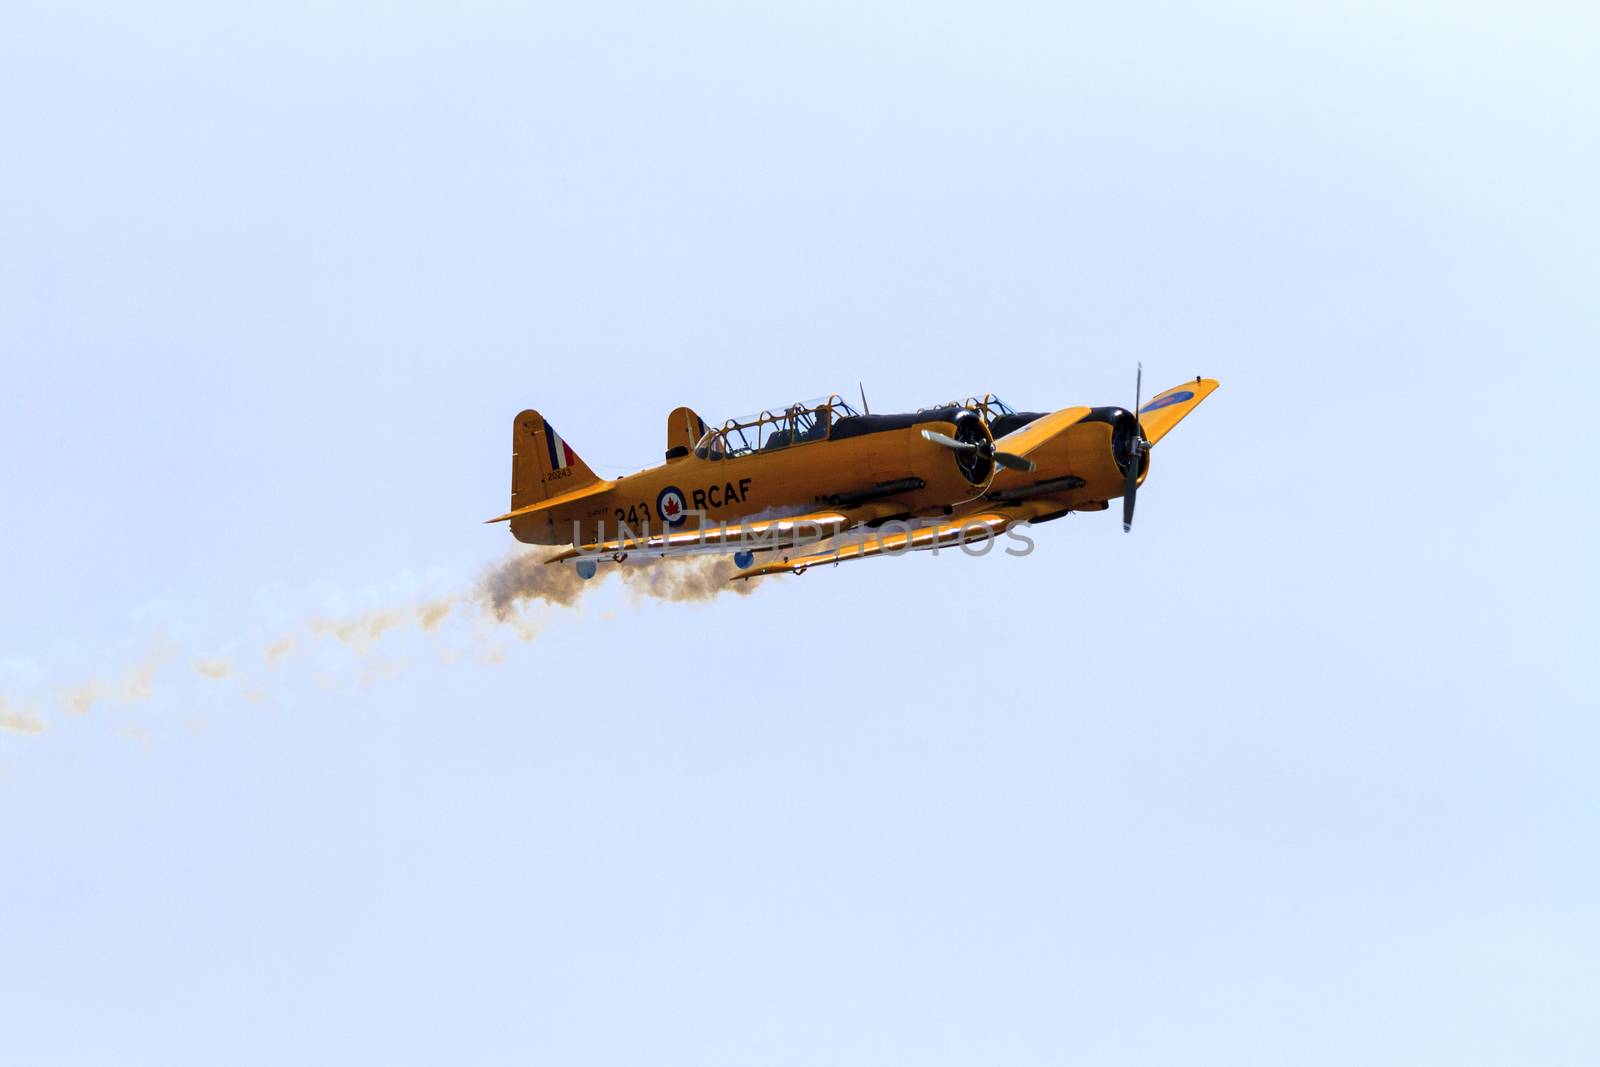 LETHBRIDGE CANADA 25 JUN 2015: International Air Show and Open House for Canadian, USA and British current and historical military and civilian aircrafts. There were also numerous flights as well.